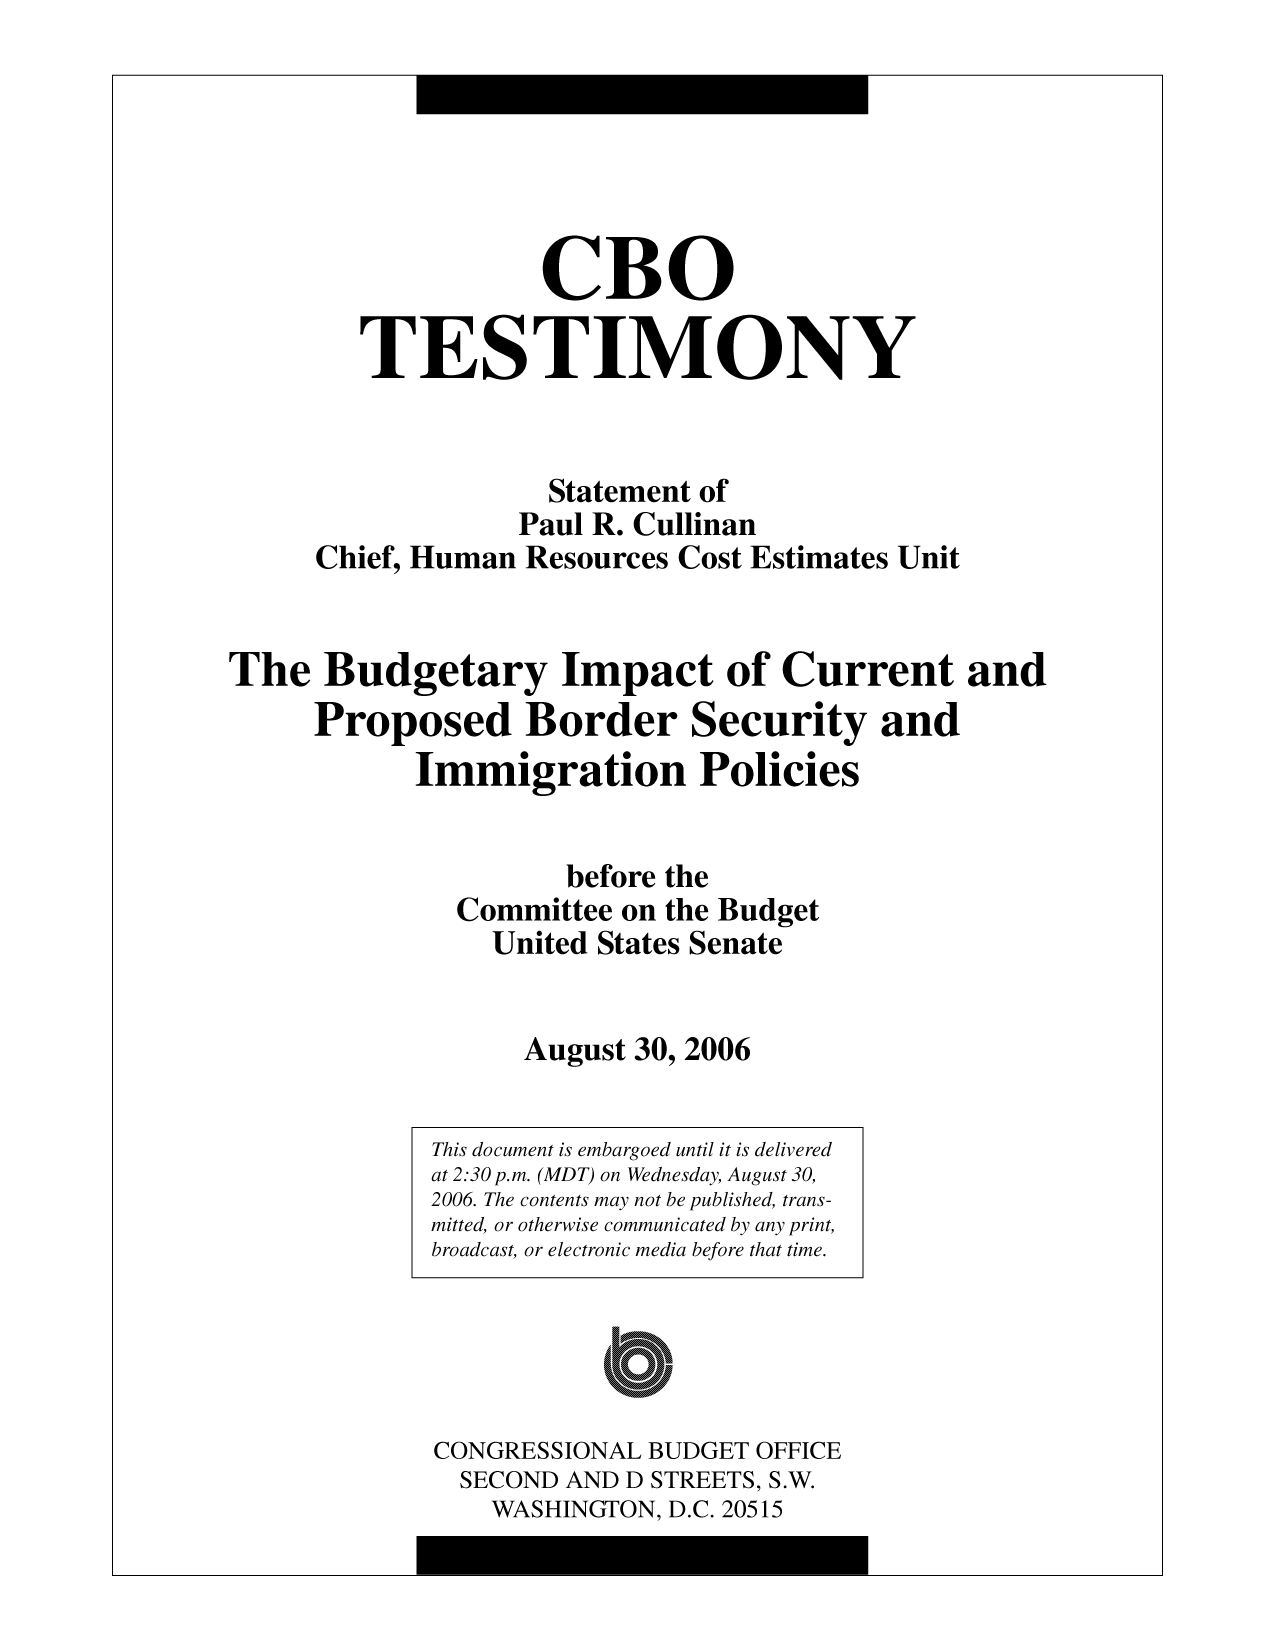 handle is hein.congrec/cbo10193 and id is 1 raw text is: CBO
TESTIMONY
Statement of
Paul R. Cullinan
Chief, Human Resources Cost Estimates Unit
The Budgetary Impact of Current and
Proposed Border Security and
Immigration Policies
before the
Committee on the Budget
United States Senate
August 30, 2006

This document is embargoed until it is delivered
at 2:30 p.m. (MDT) on Wednesday, August 30,
2006. The contents may not be published, trans-
mitted, or otherwise communicated by any print,
broadcast, or electronic media before that time.
CONGRESSIONAL BUDGET OFFICE
SECOND AND D STREETS, S.W.
WASHINGTON, D.C. 20515


